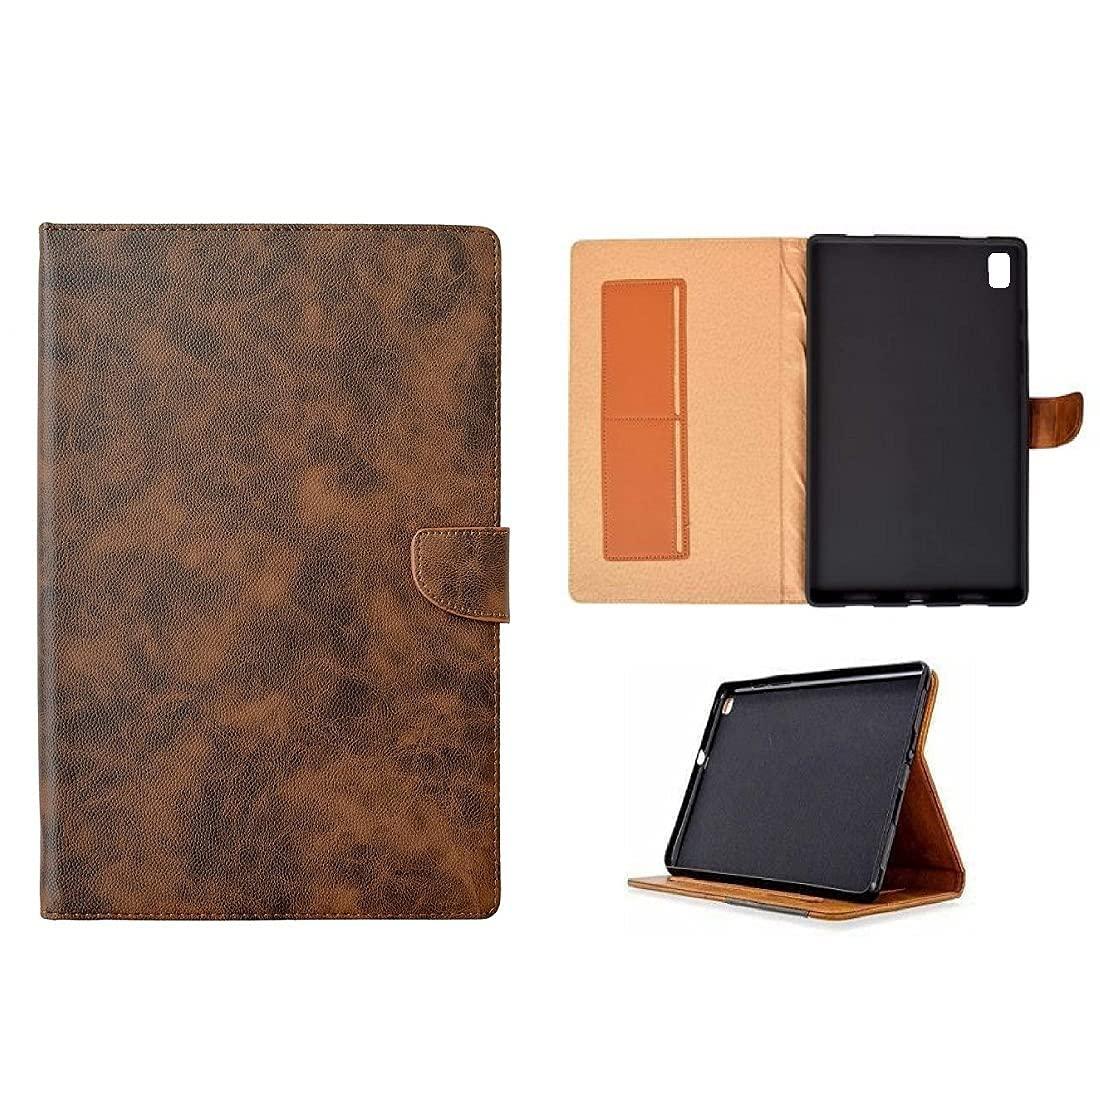 ValueActive Leather Flip Case Cover for Acer Tab 10 T4 - ValueActive